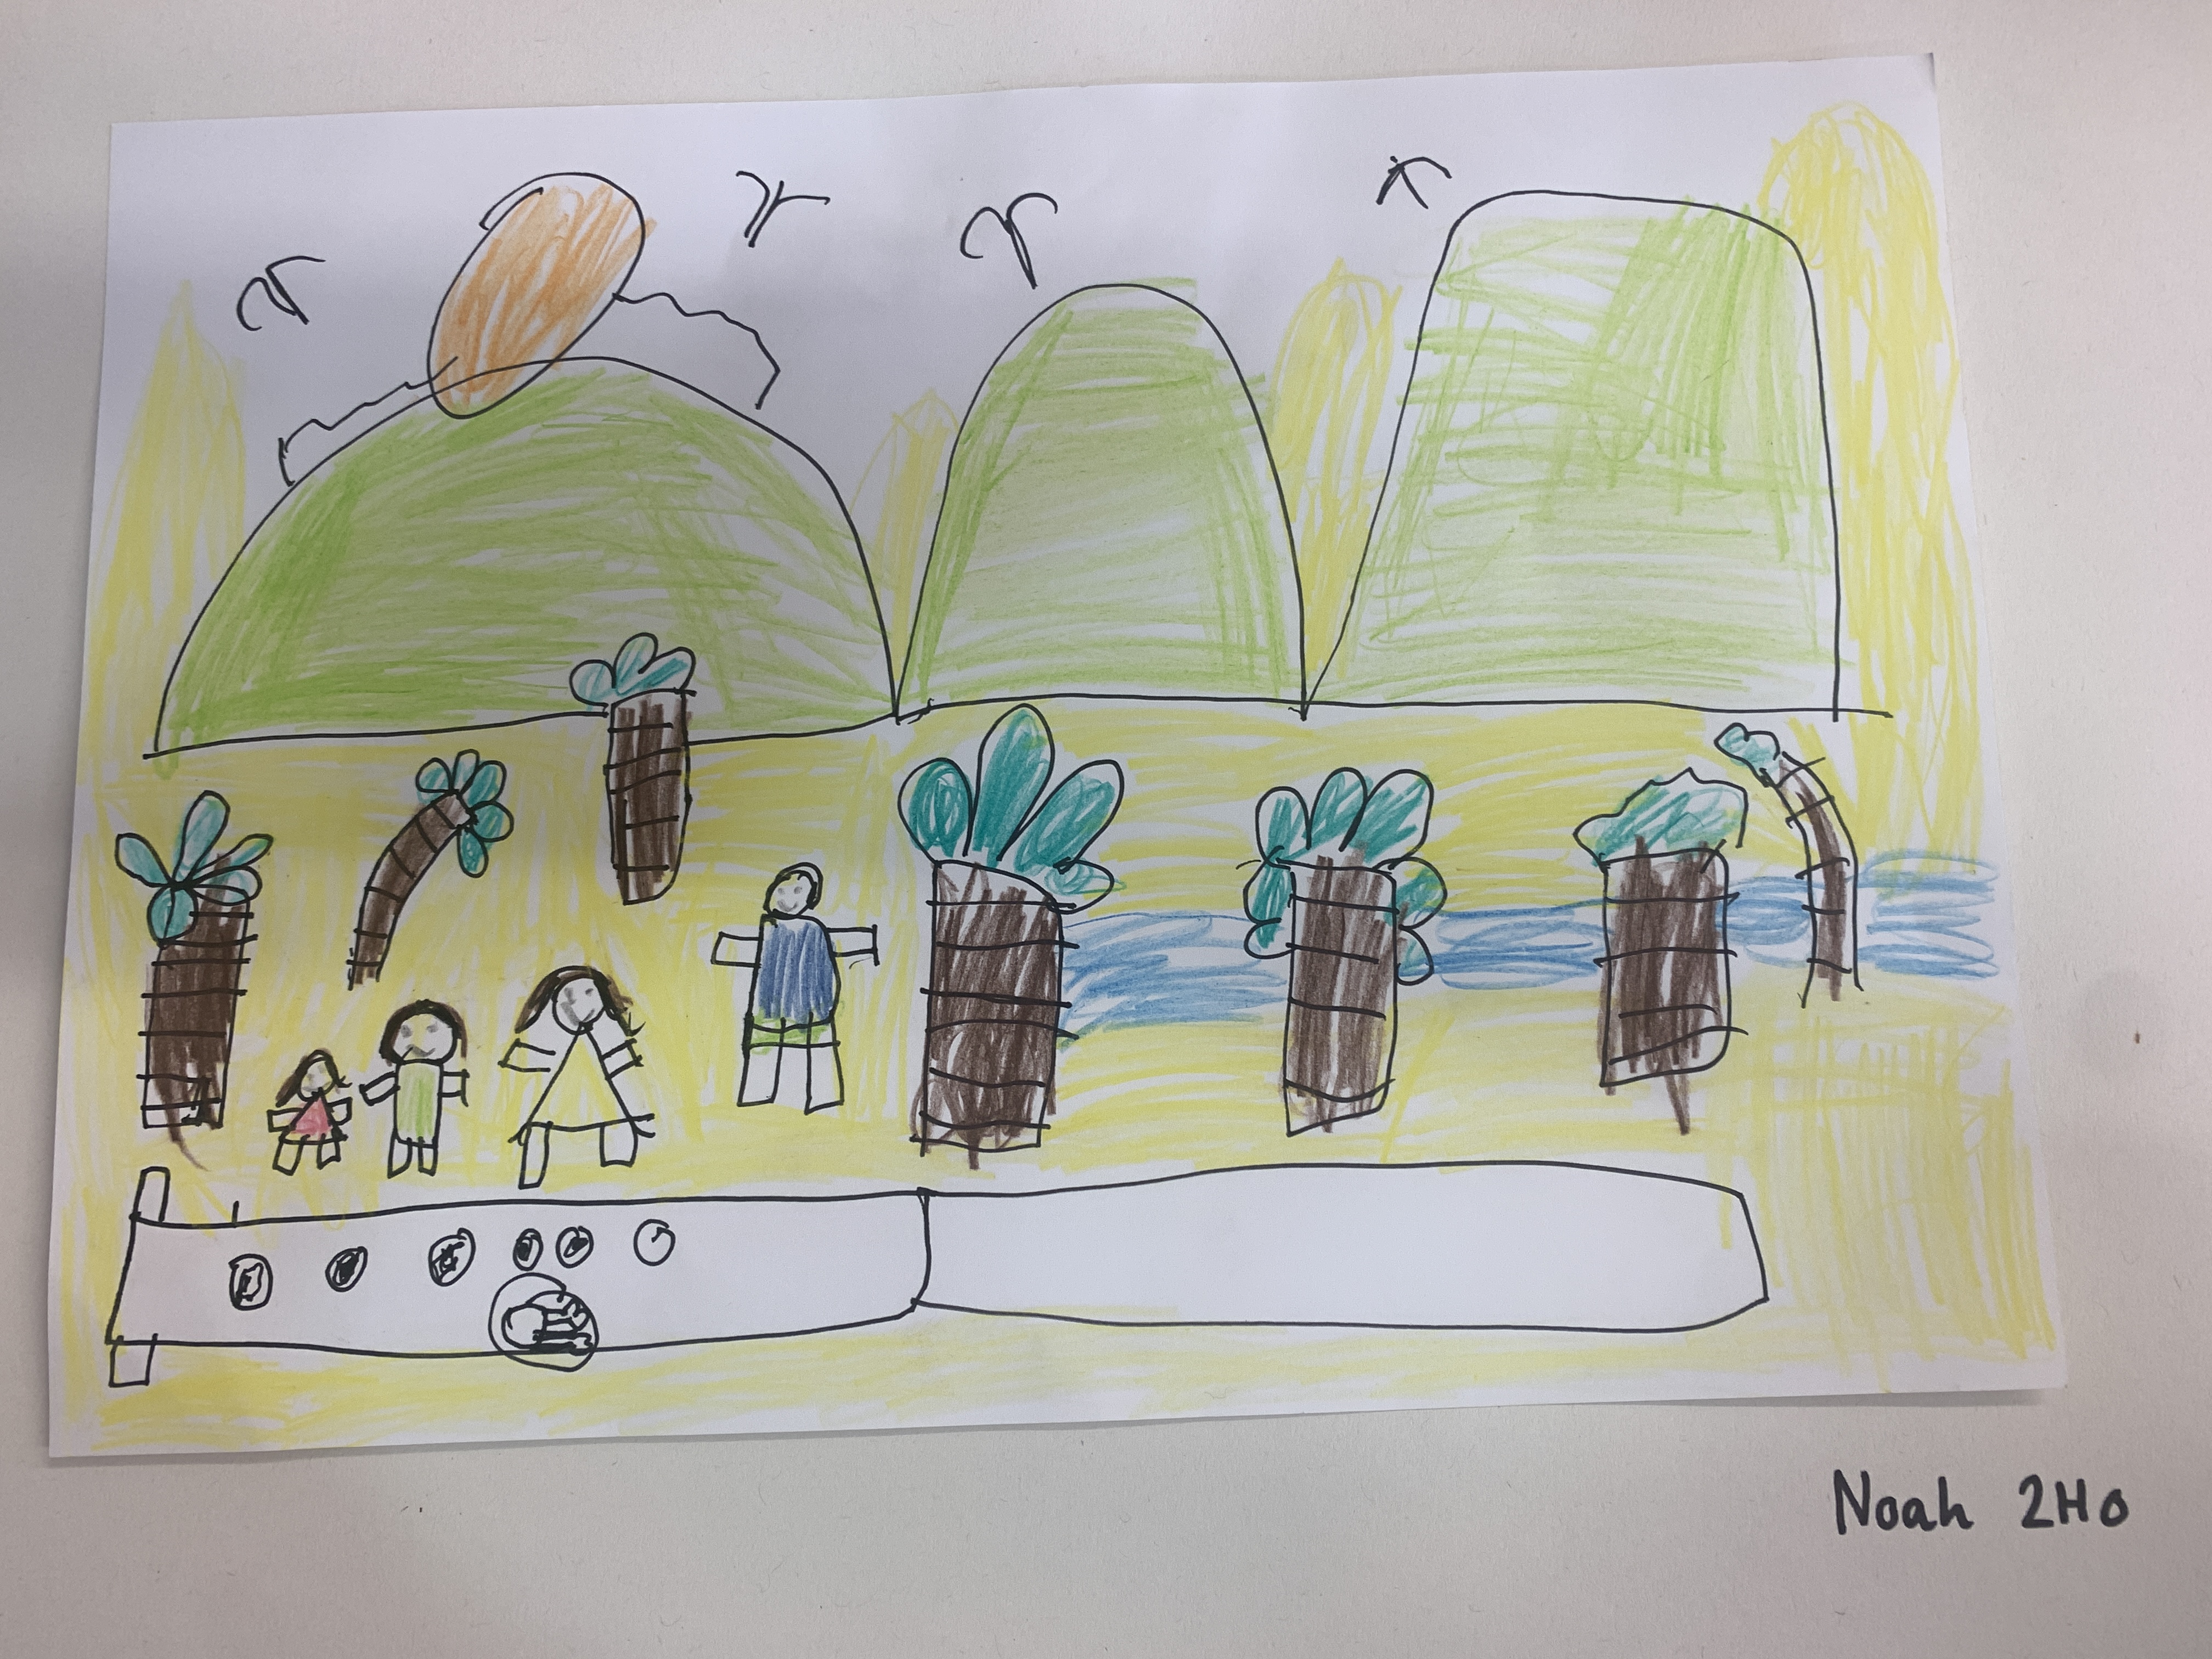 We love the Outdoors by Noah